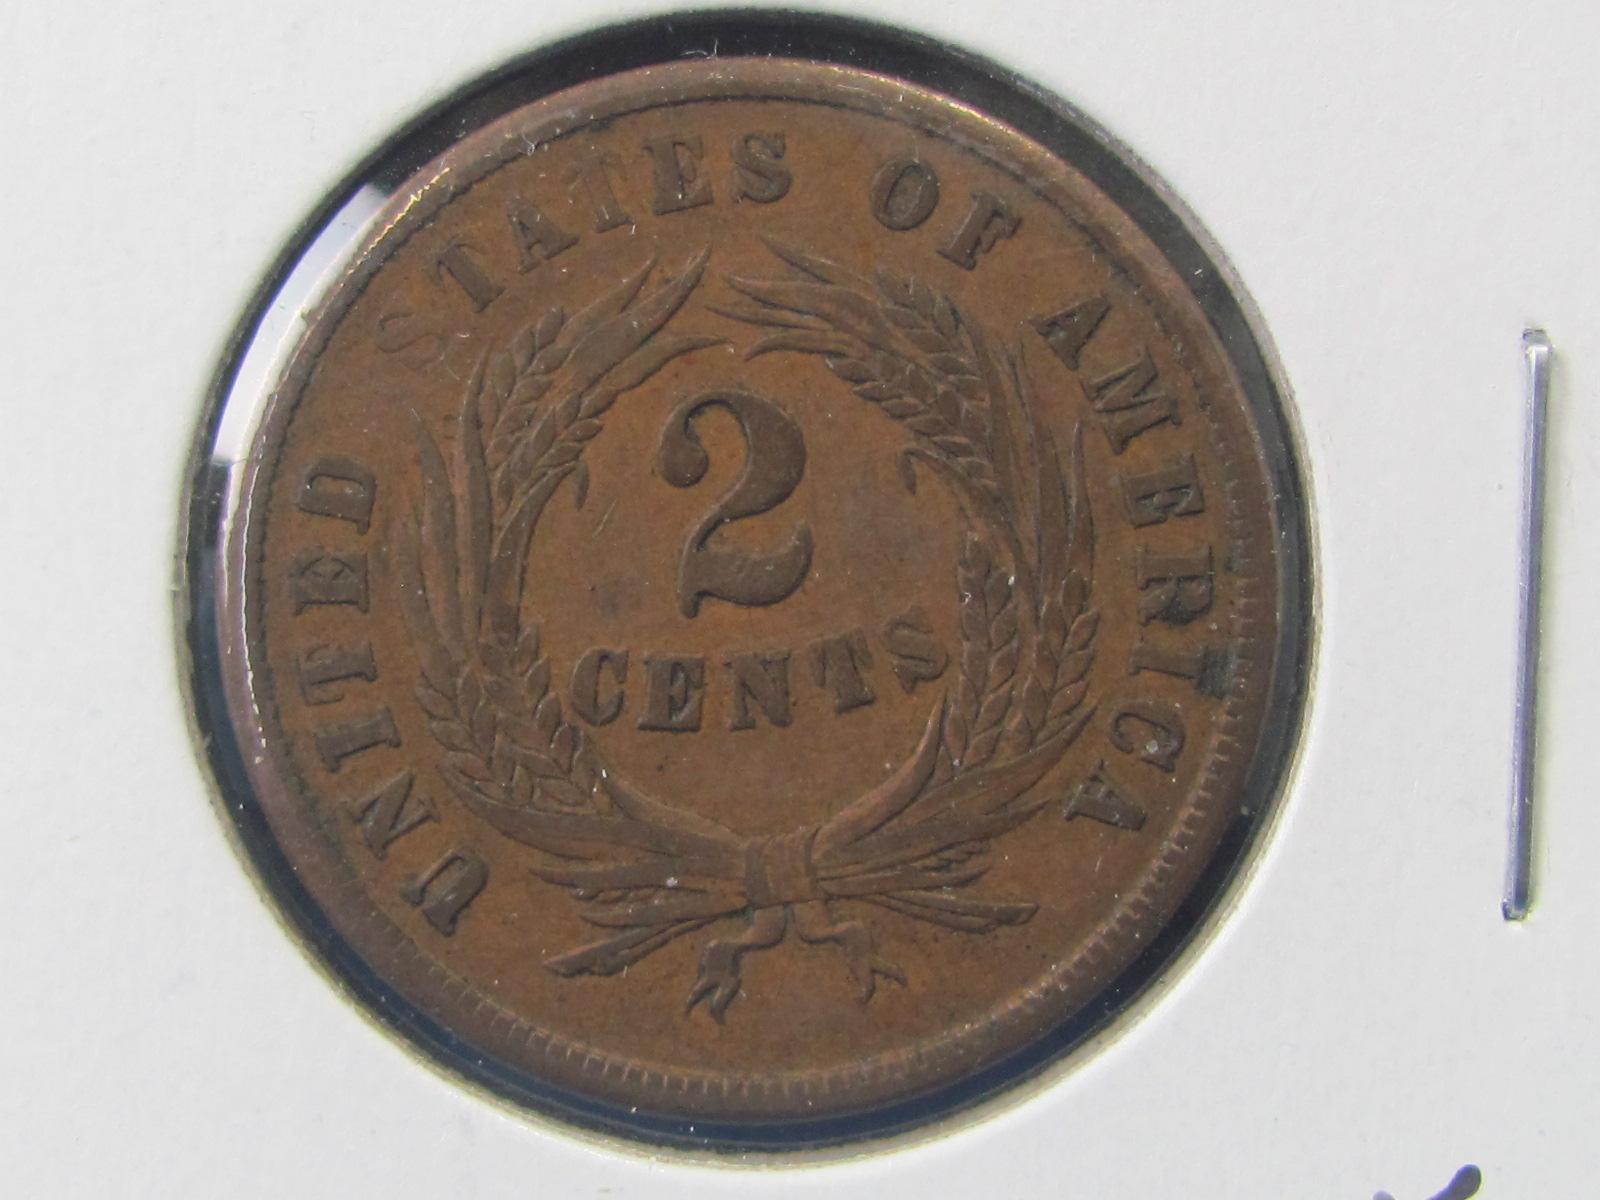 1864 two-cent coin (great detail - beautiful coin!)